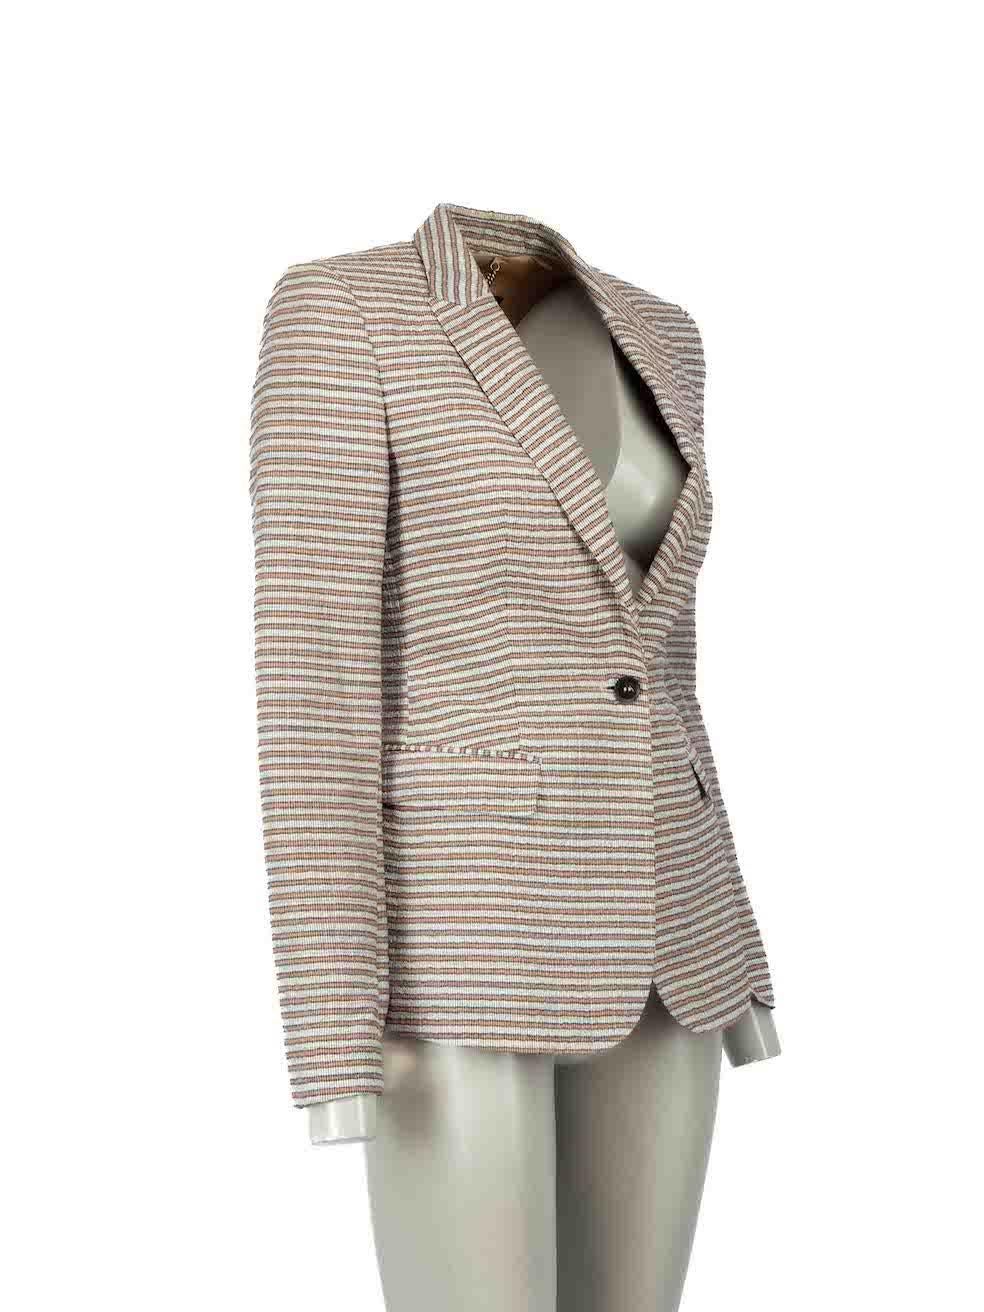 CONDITION is Never worn. No visible wear to jacket is evident on this new Burberry Prorsum designer resale item.
  
Details
Grey
Cotton
Bazer
Striped pattern
Button up fastening
Buttoned cuffs
2x Side pockets
  
Made in Italy
  
Composition
54%